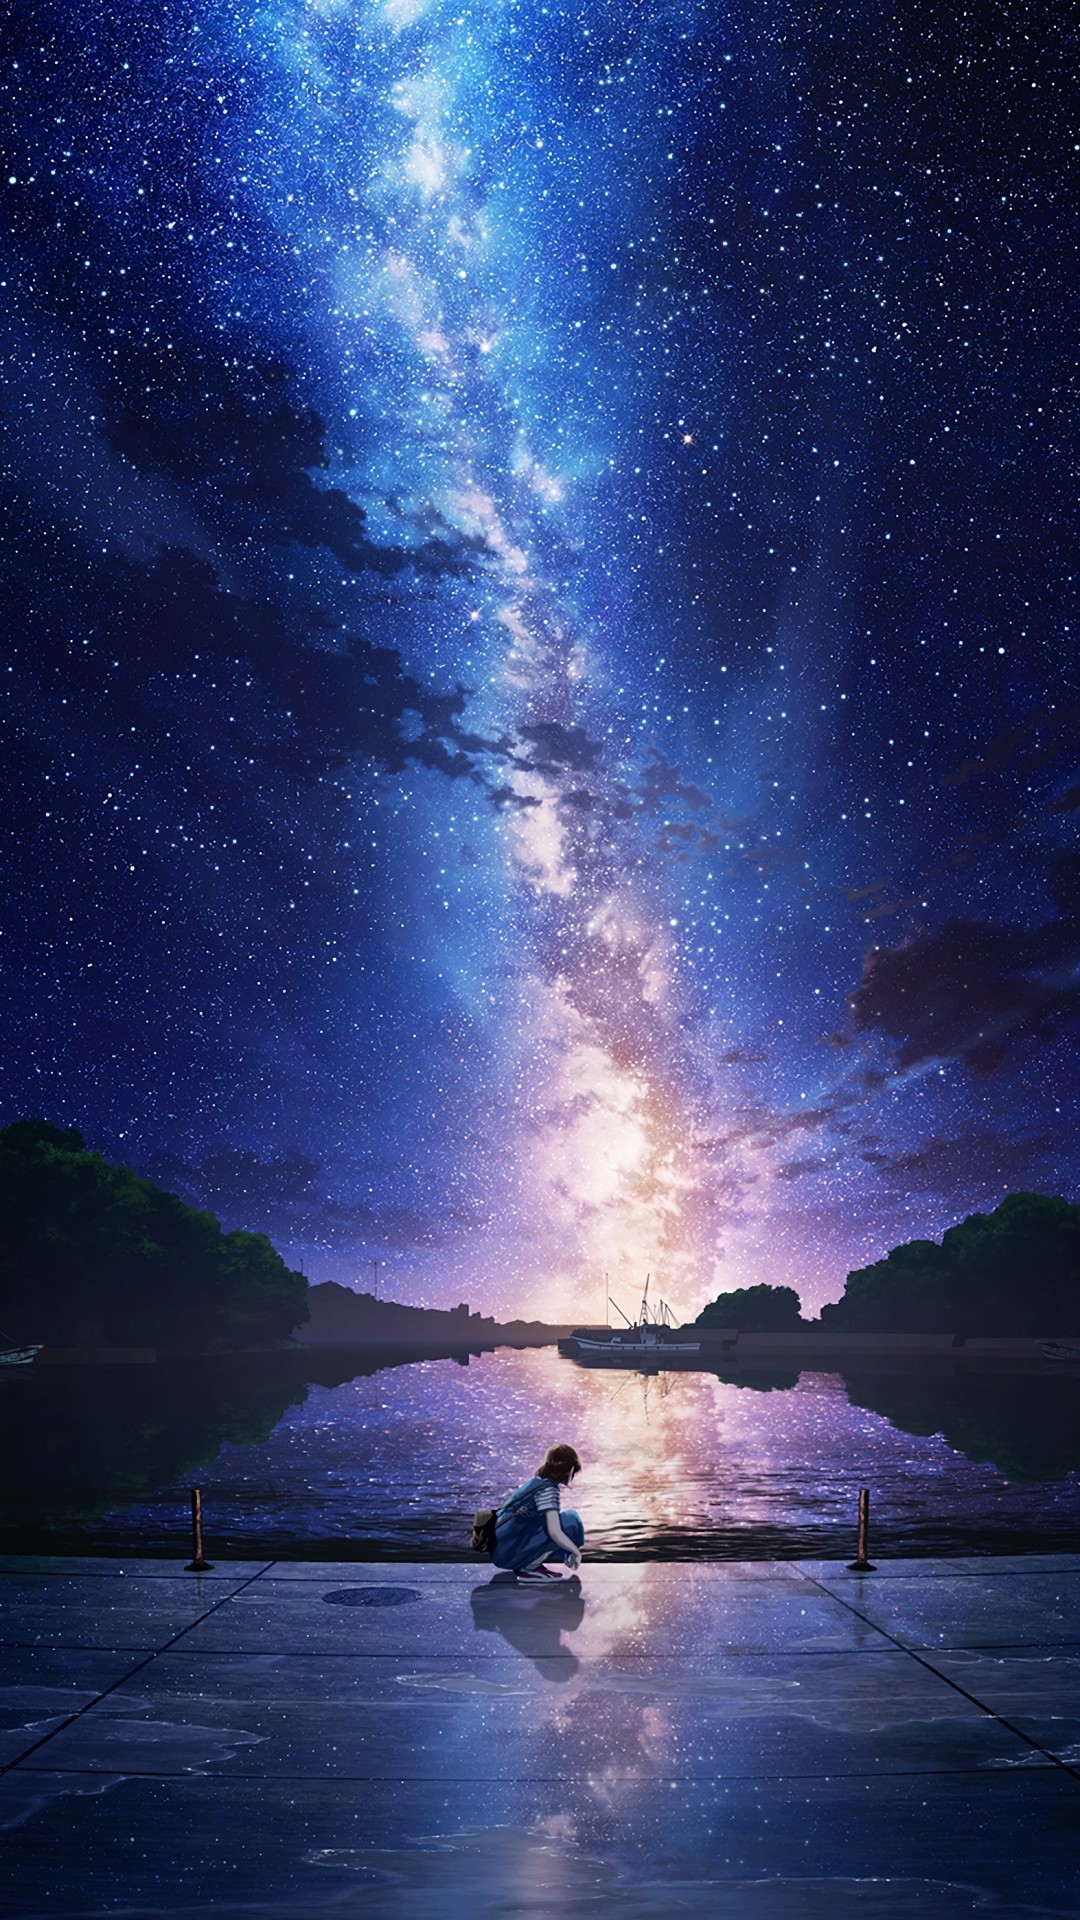 Download 1080x1920 Anime Landscape, Stars, Night, Scenic Wallpaper for iPhone iPhone 7 Plus, iPhone 6+, Sony Xperia Z, HTC One